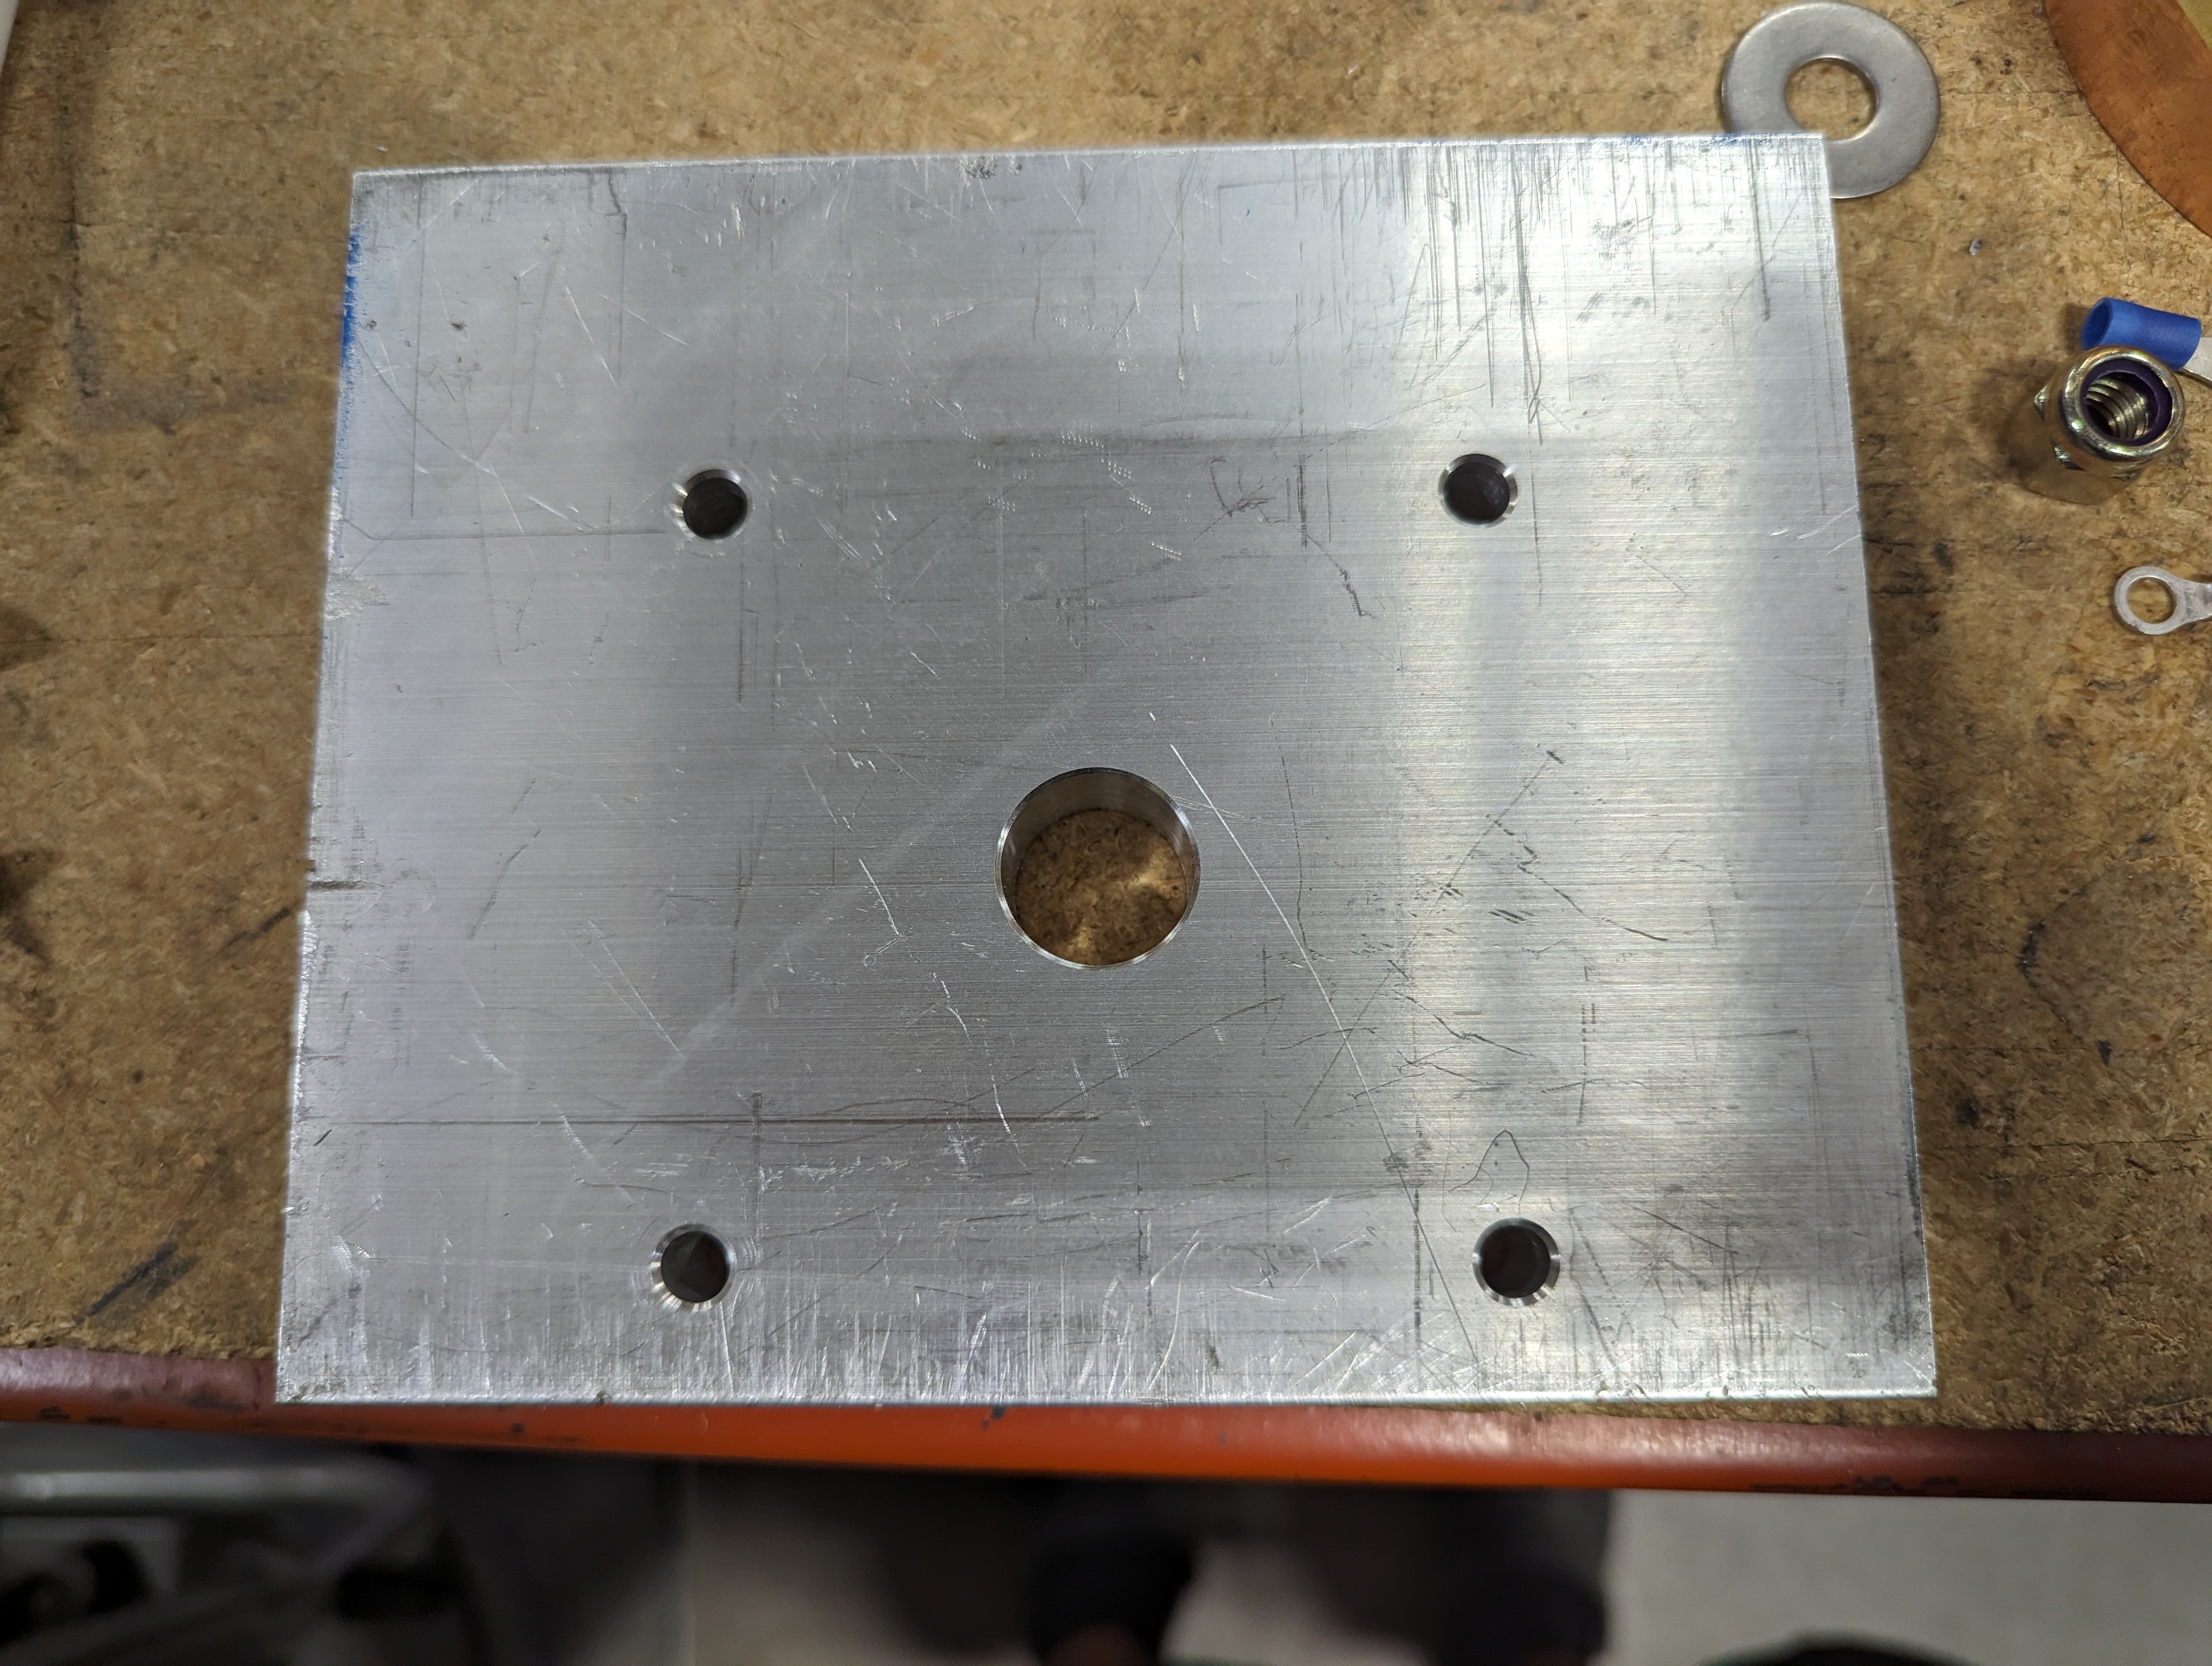 The completed end plate of the machine